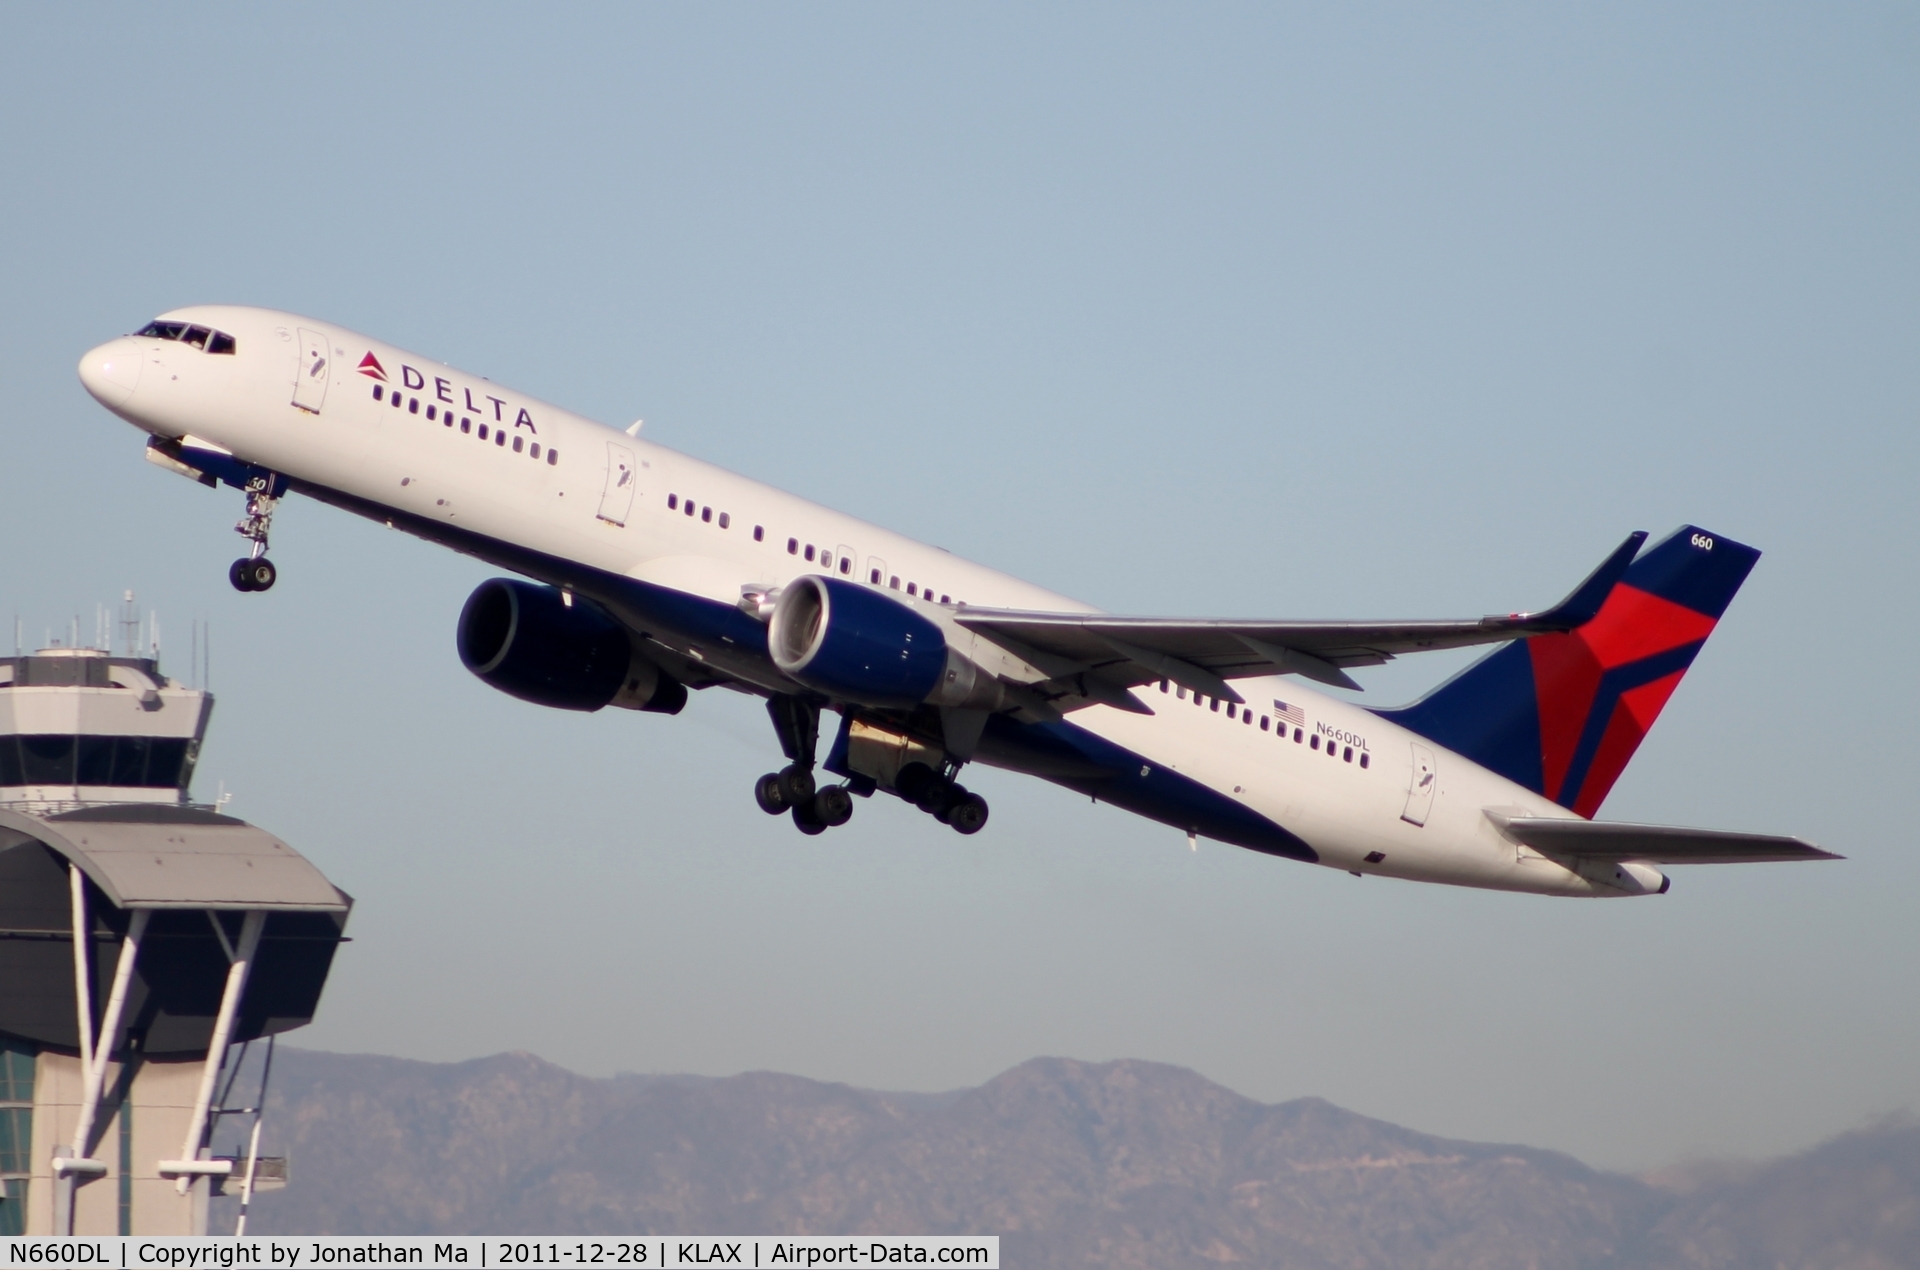 N660DL, 1990 Boeing 757-232 C/N 24422, Delta 752 takes off with the control tower in the background